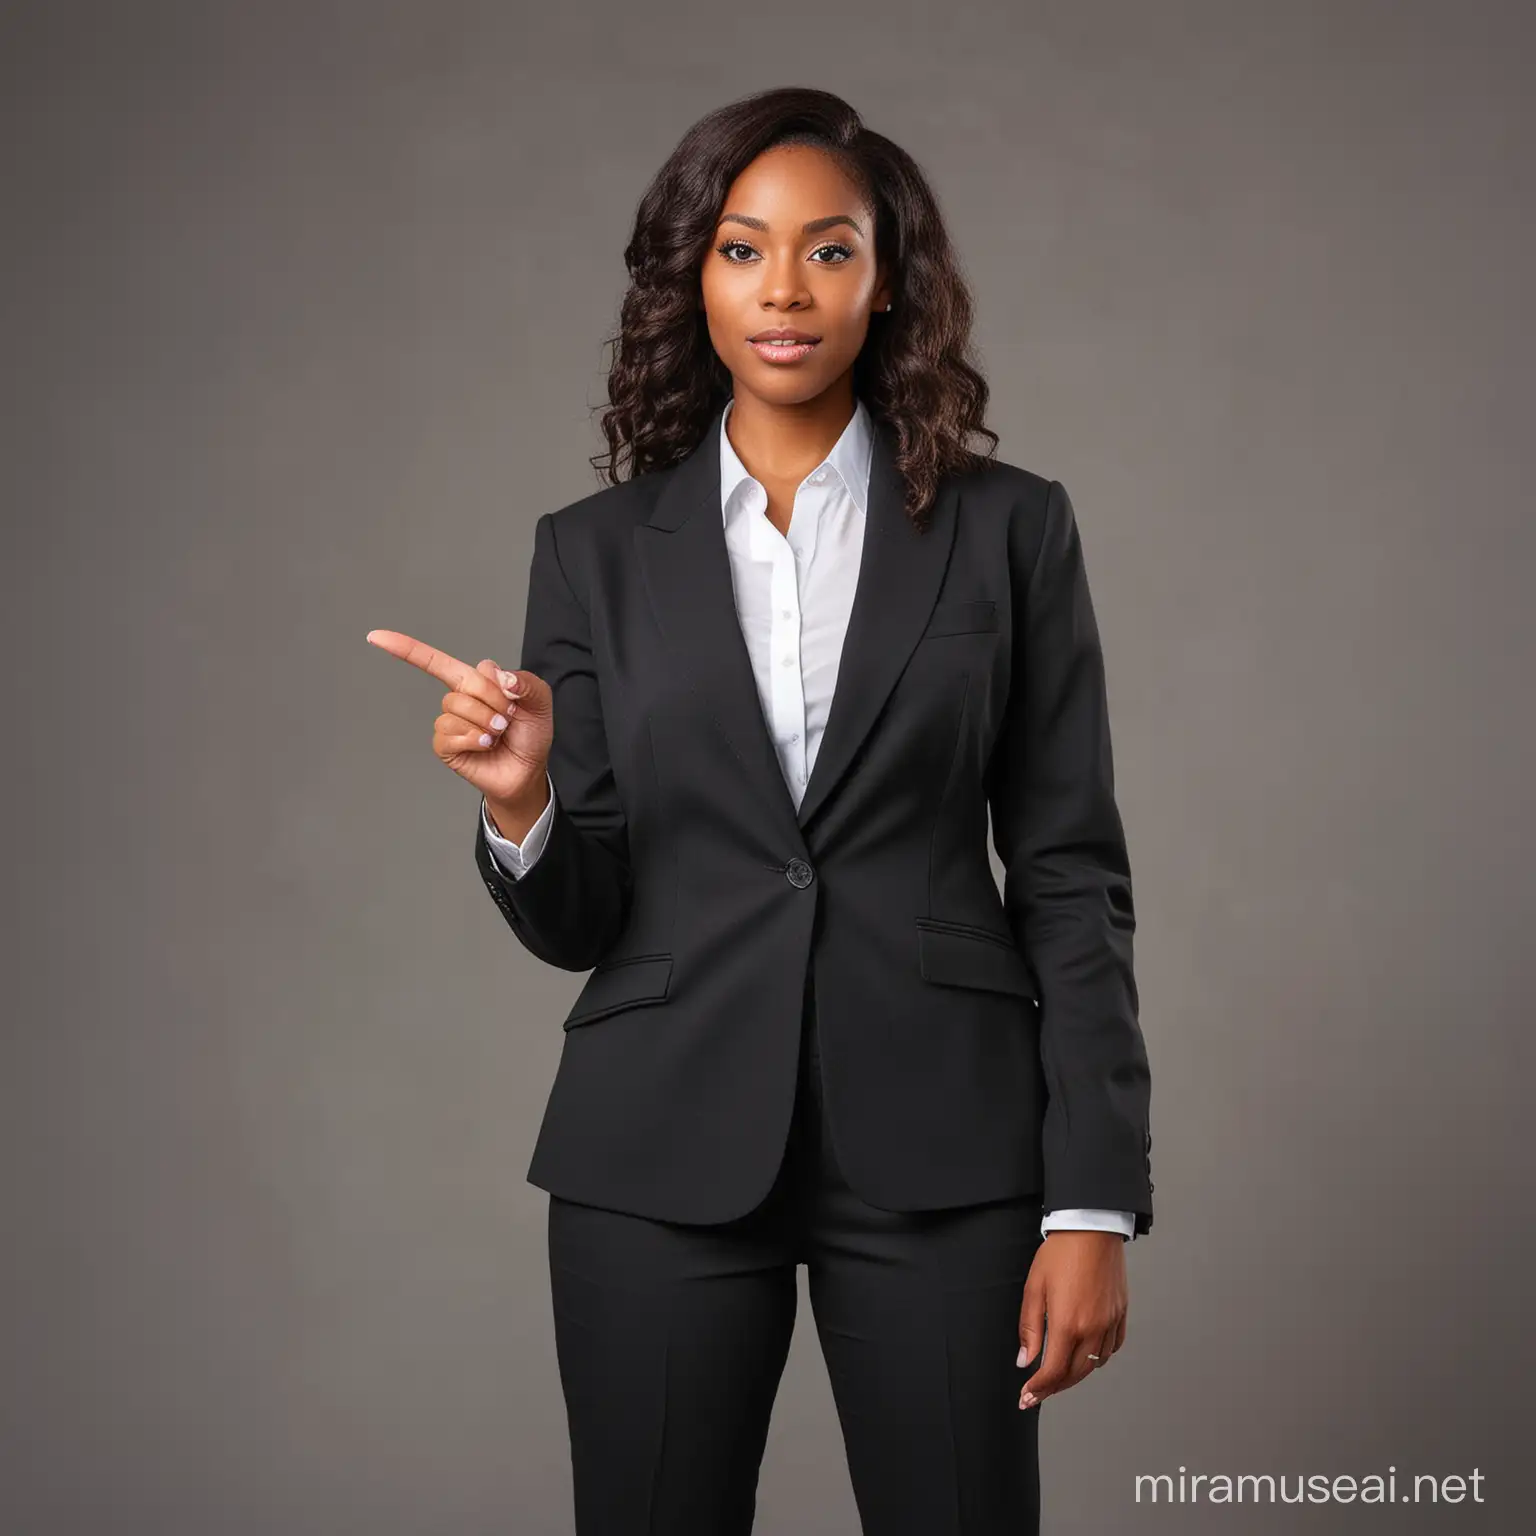 Black business woman wearing suit pointing